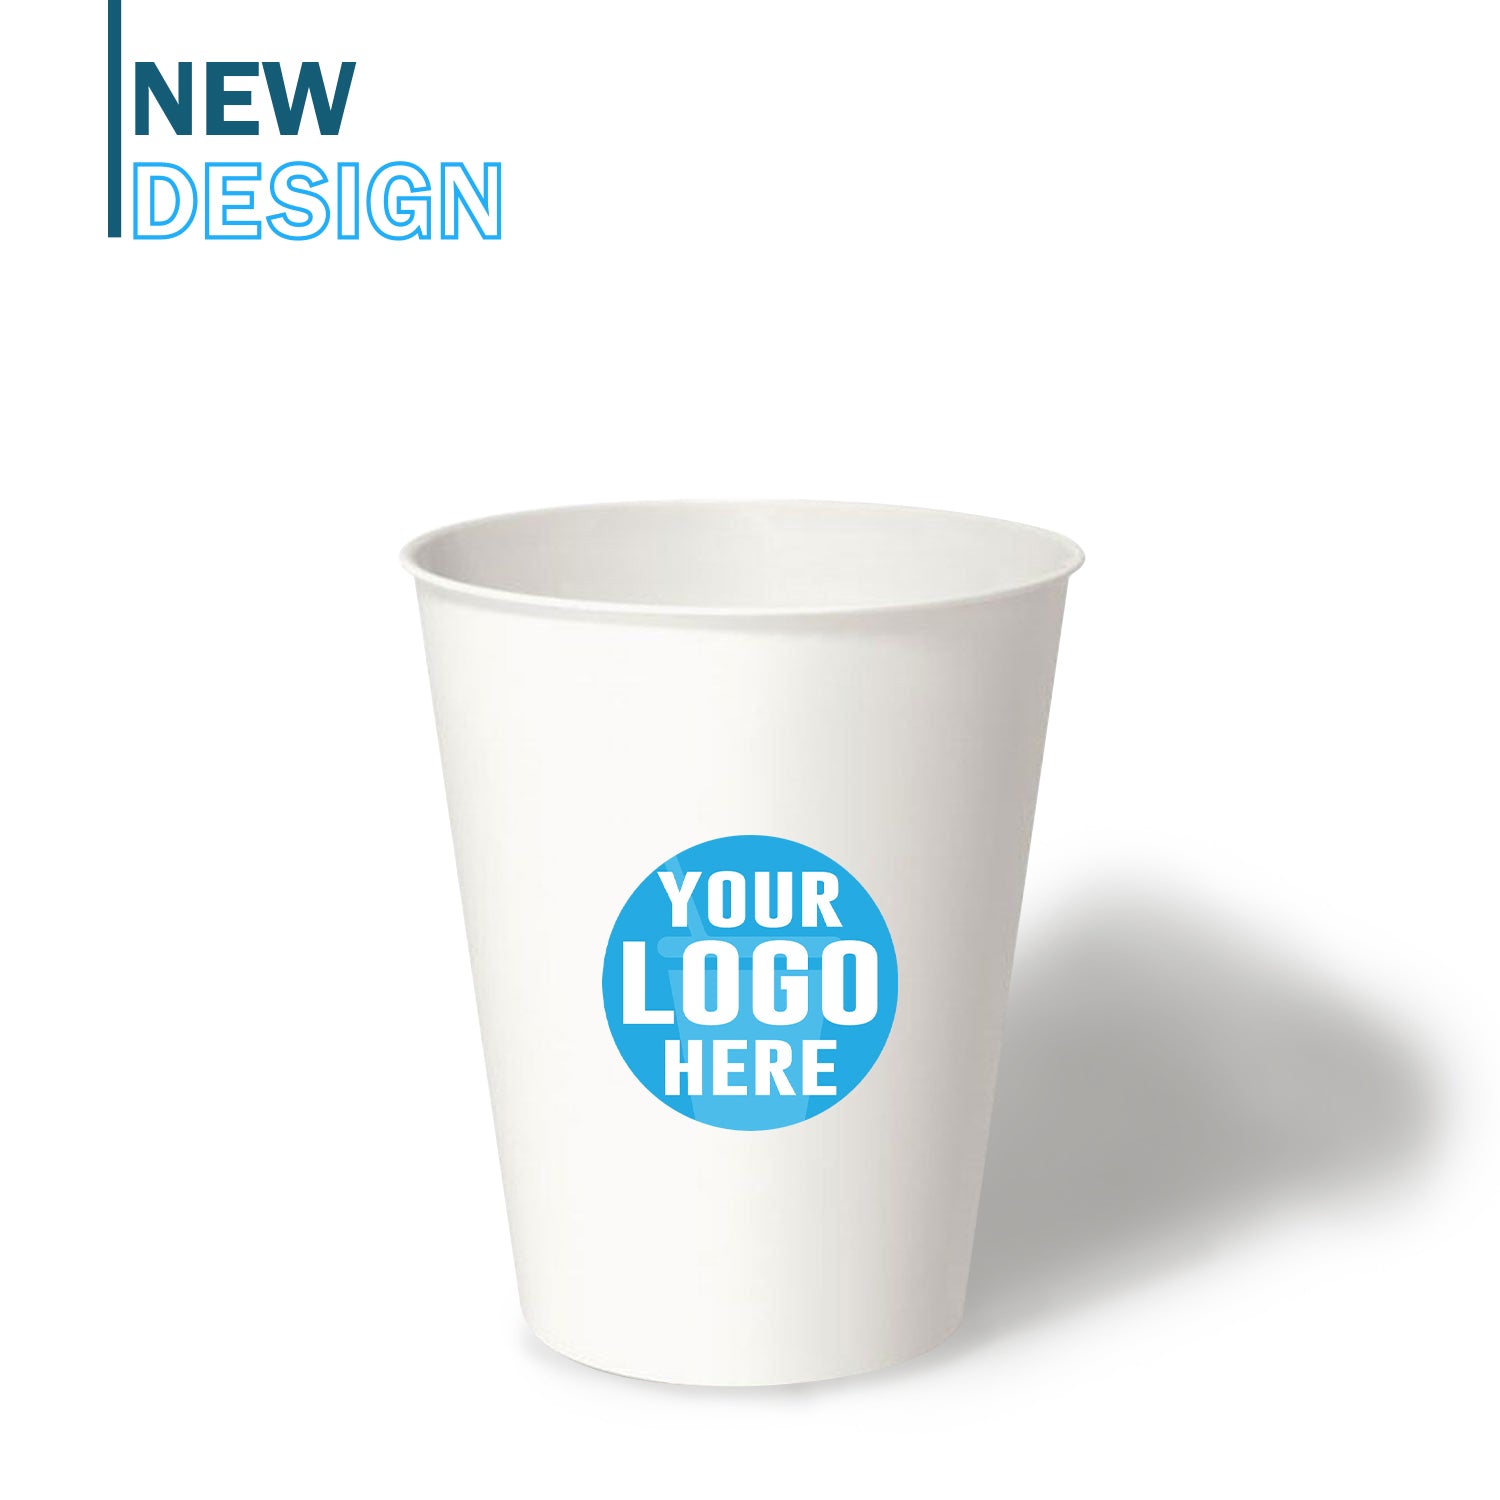 Custom Disposable Paper Coffee Cup Full Color Print - 6 oz.